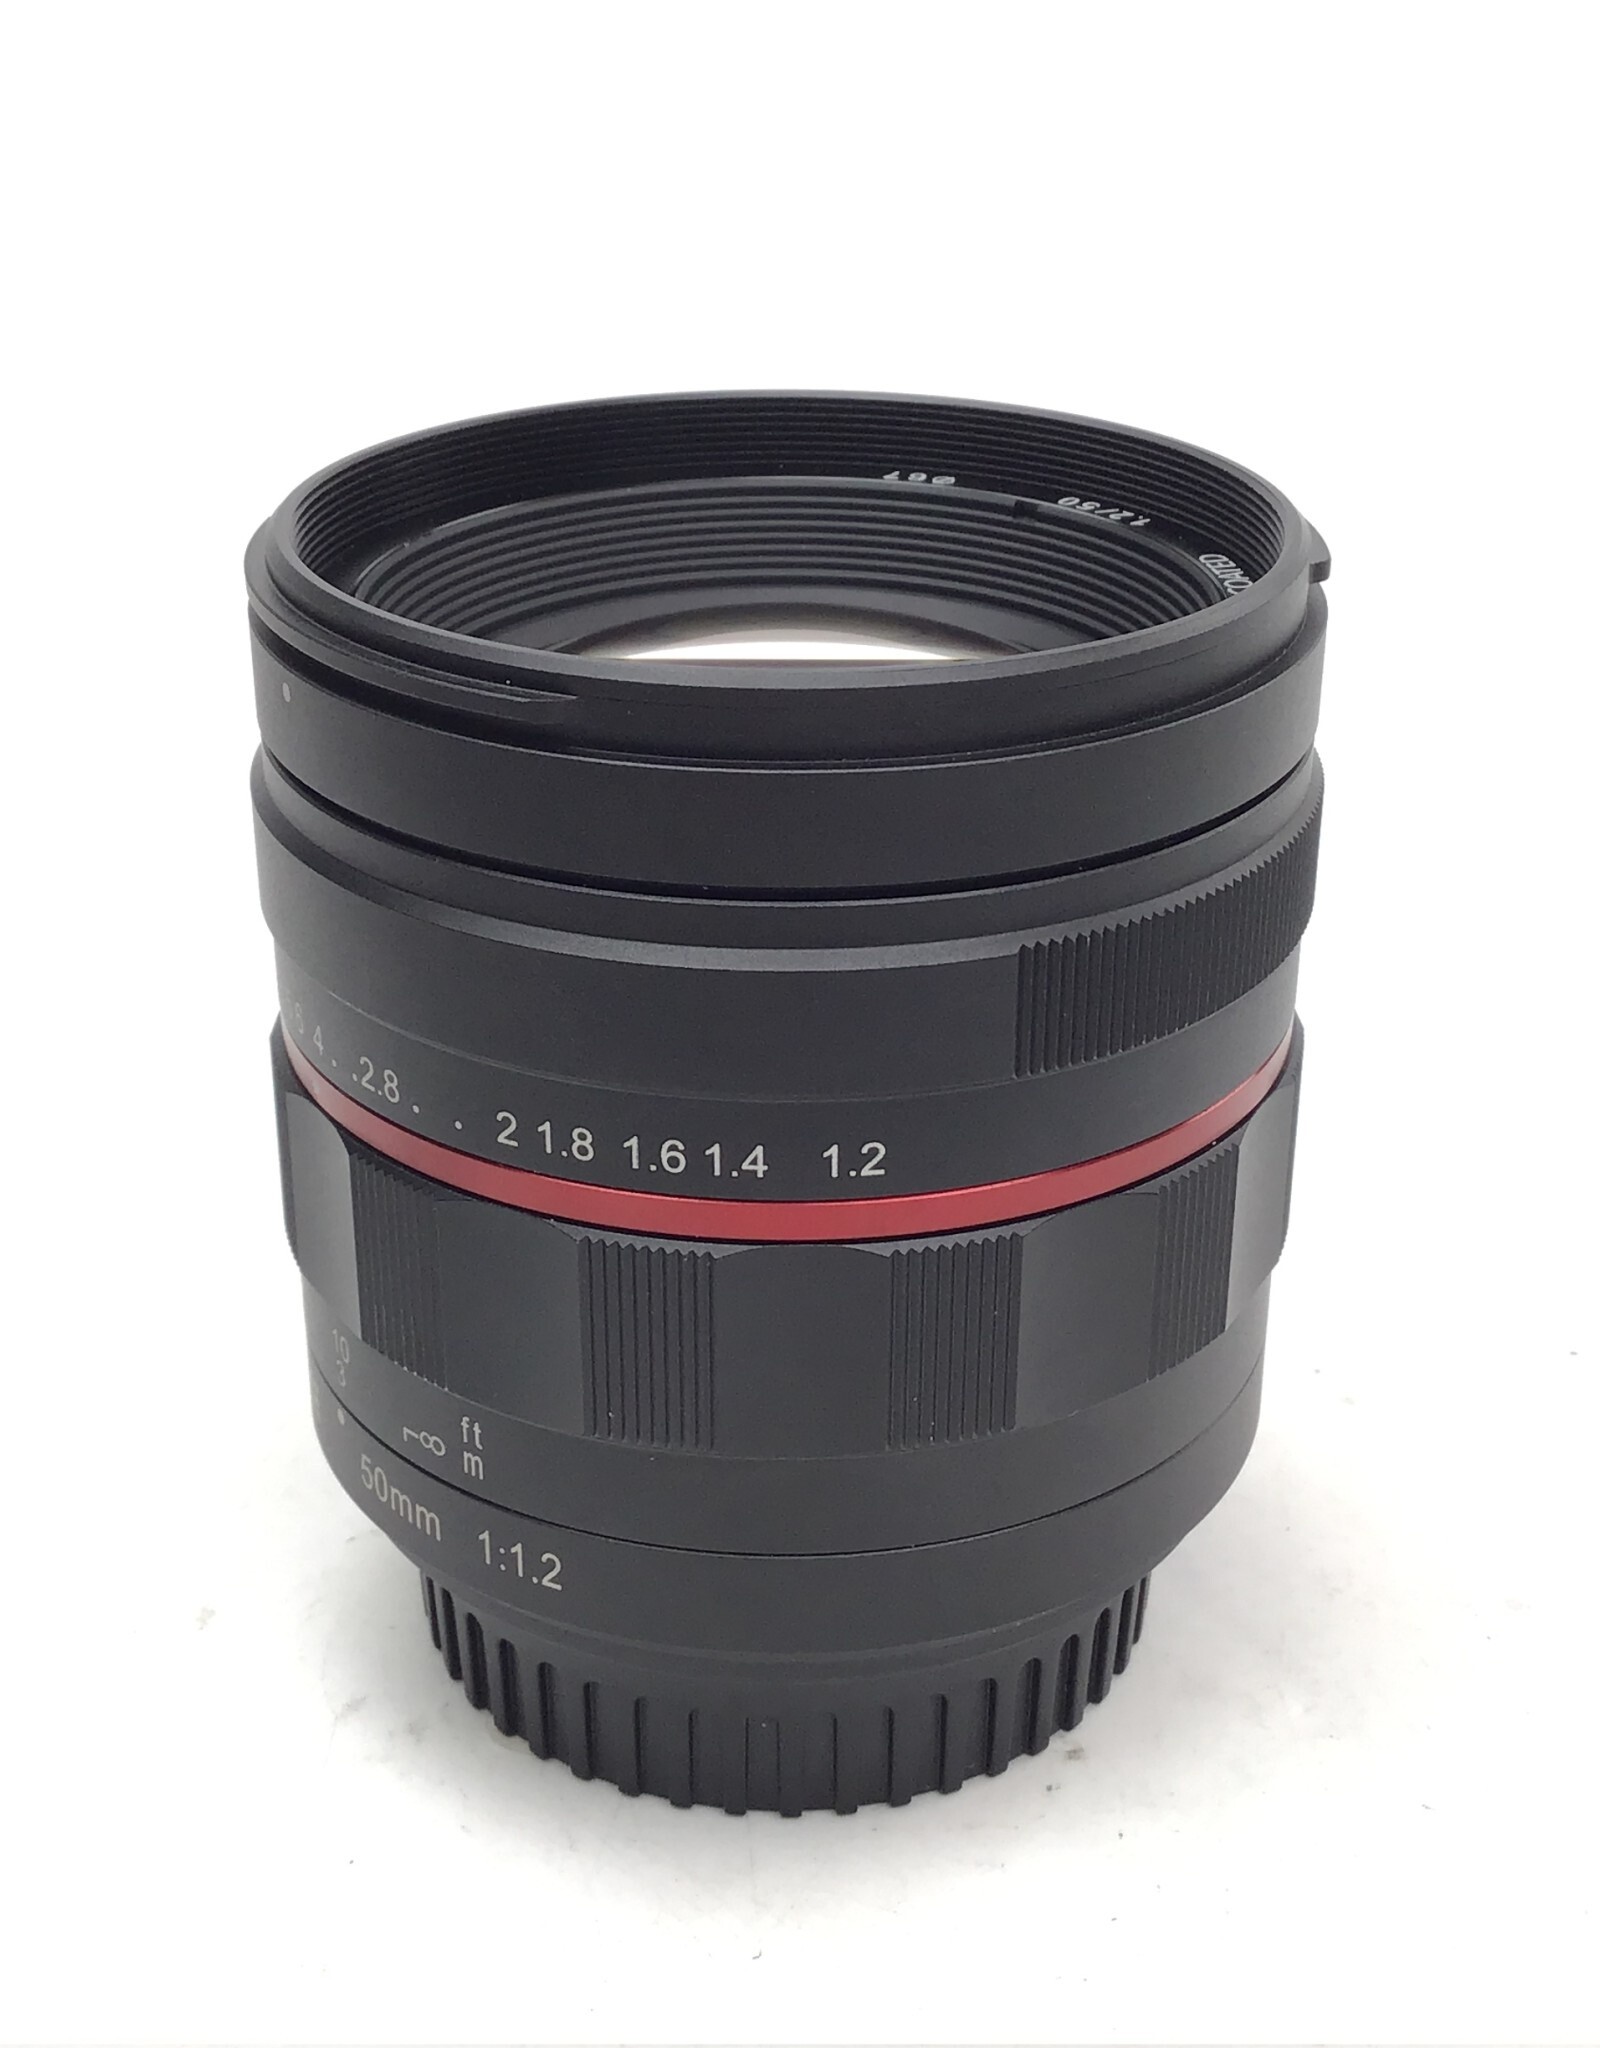 Meike Meike 50mm f1.2 Lens for Canon EF Used Good